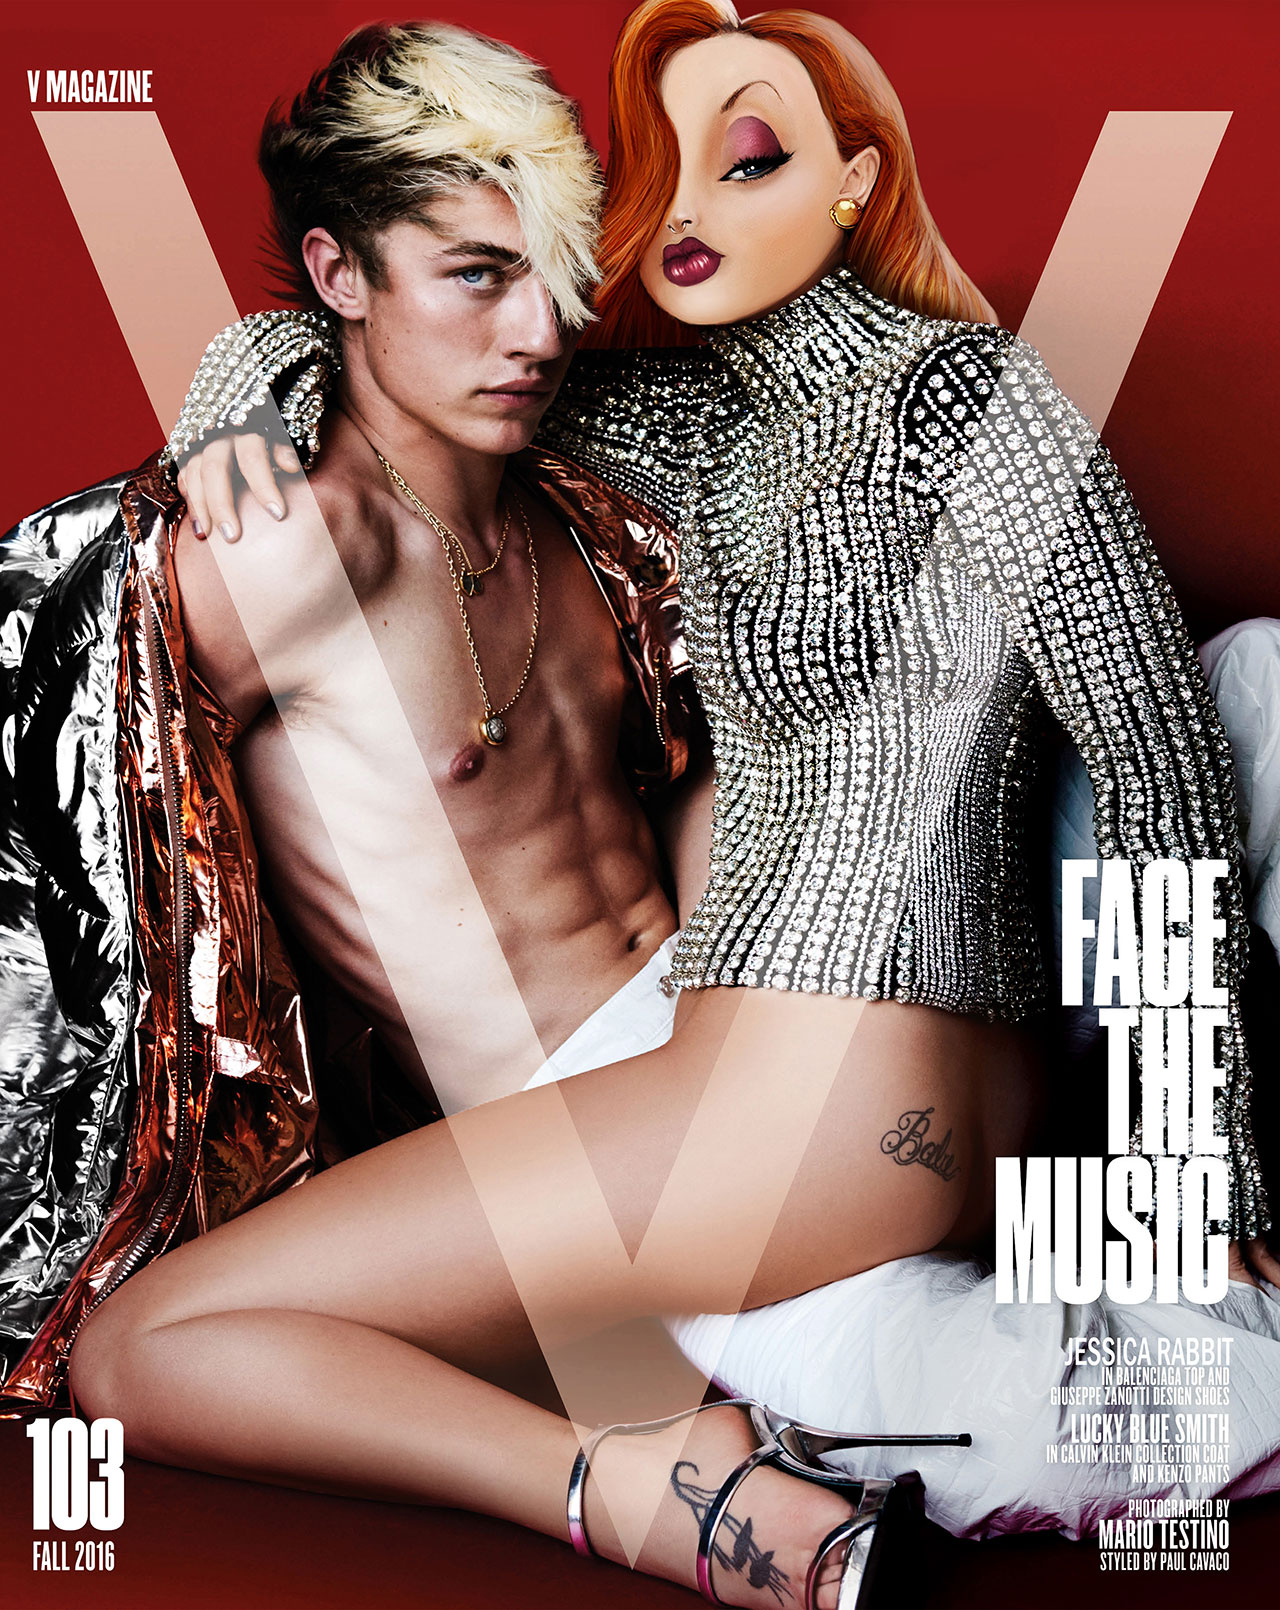 Lucky Blue Smith and Kacy Hill as Jessica Rabbit from the cover of the September 2016 issue of V magazine. Photographed by Mario Testino, photo edit by Gregory Masouras.